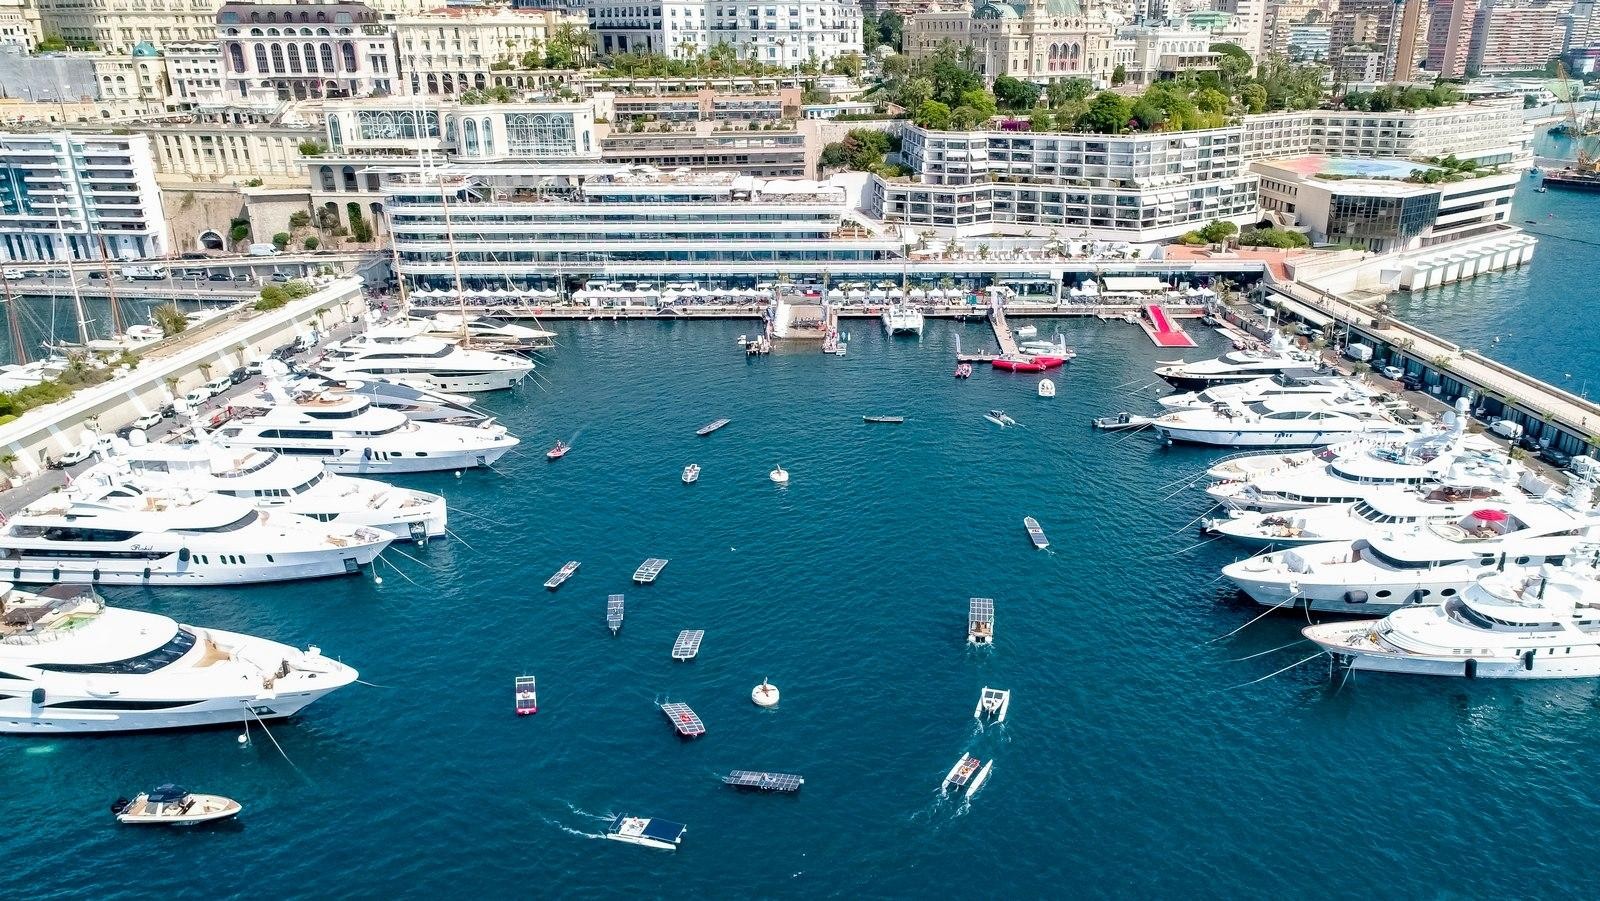 Tuesday 6th July, start of the 8th Monaco Energy Boat Challenge